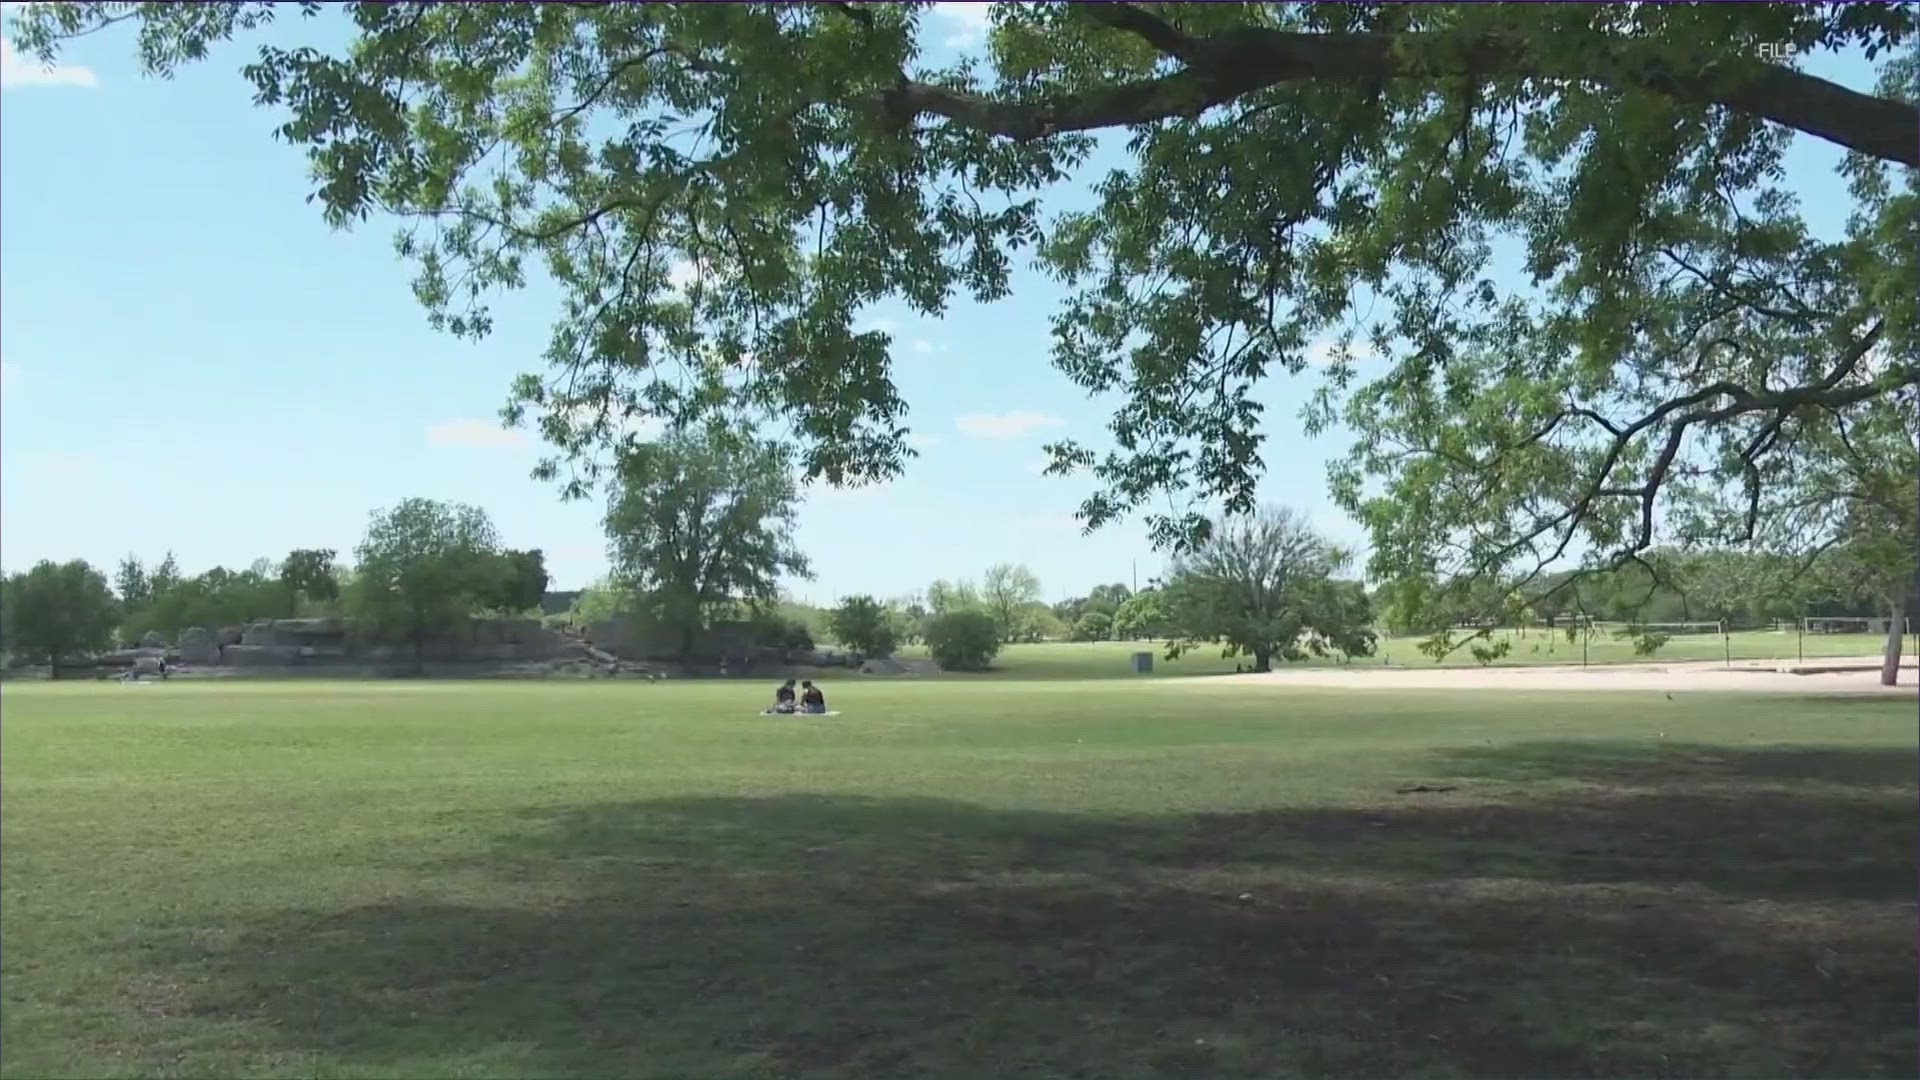 The Austin Parks and Recreation Department is getting national recognition for its service to the community.